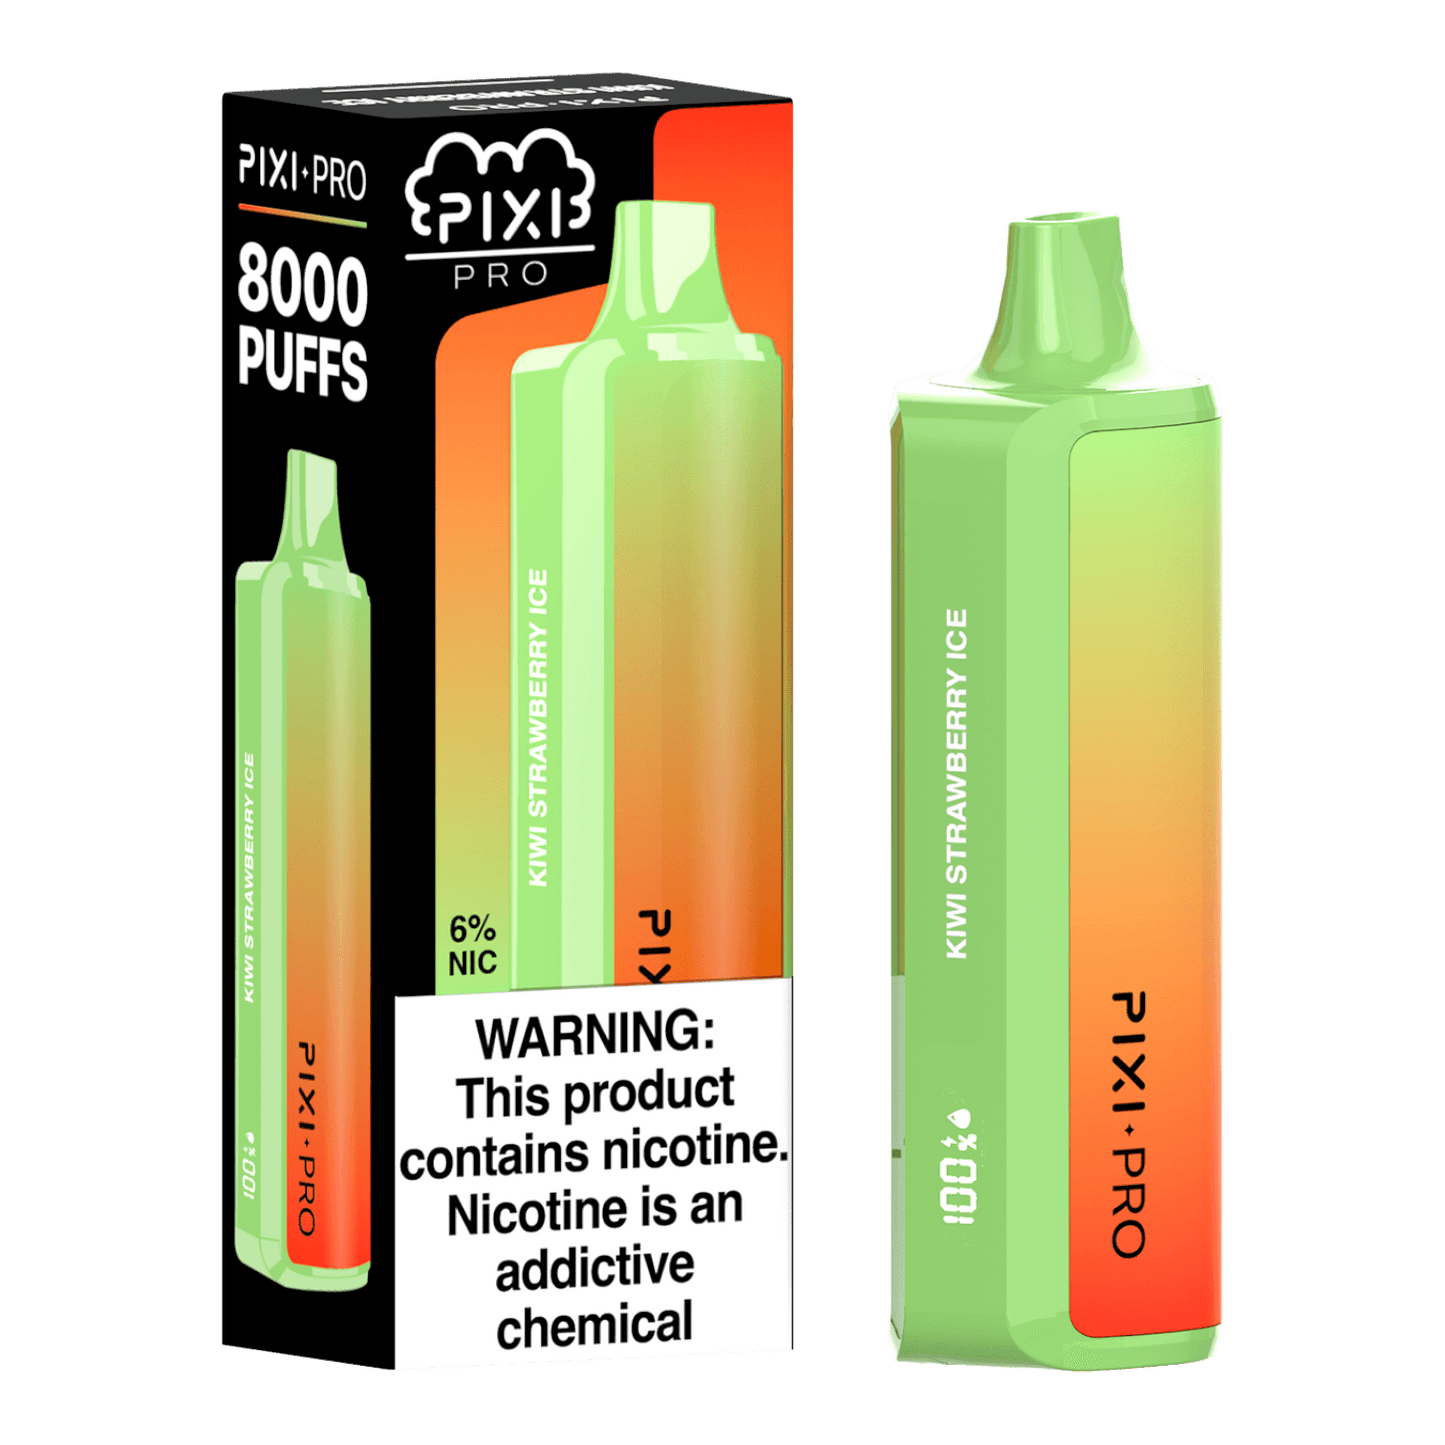 PIXI Pro Vape Disposable (8000 Puffs) LCD Display Indicator Best Sales Price - Disposables